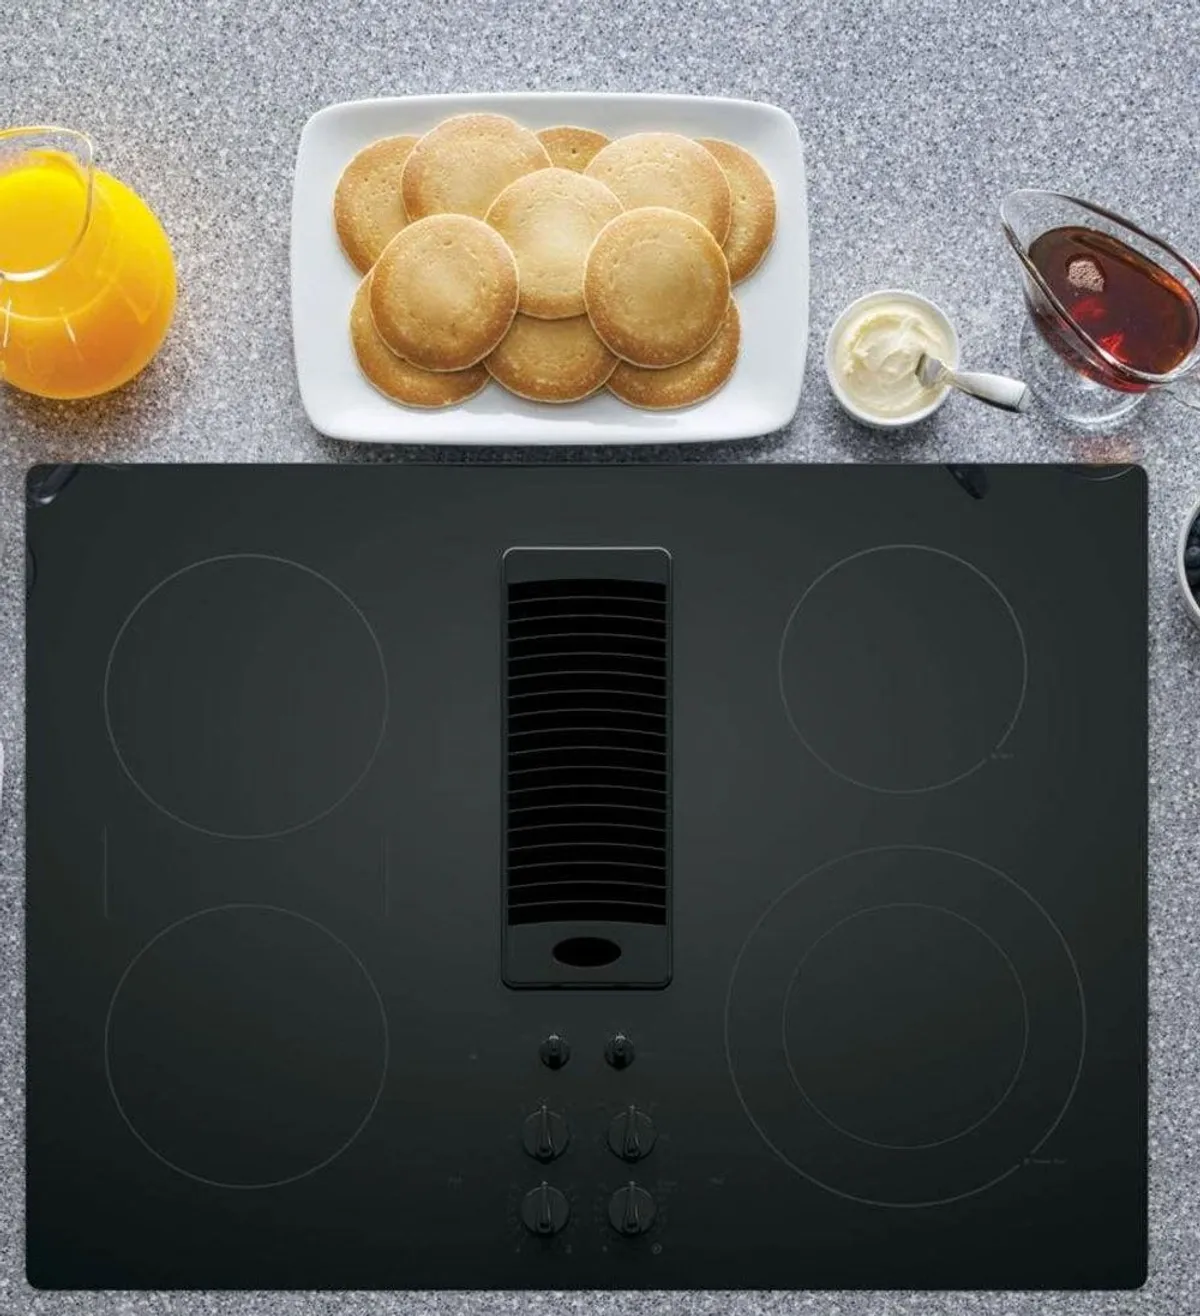 best electric cooktop review 2020